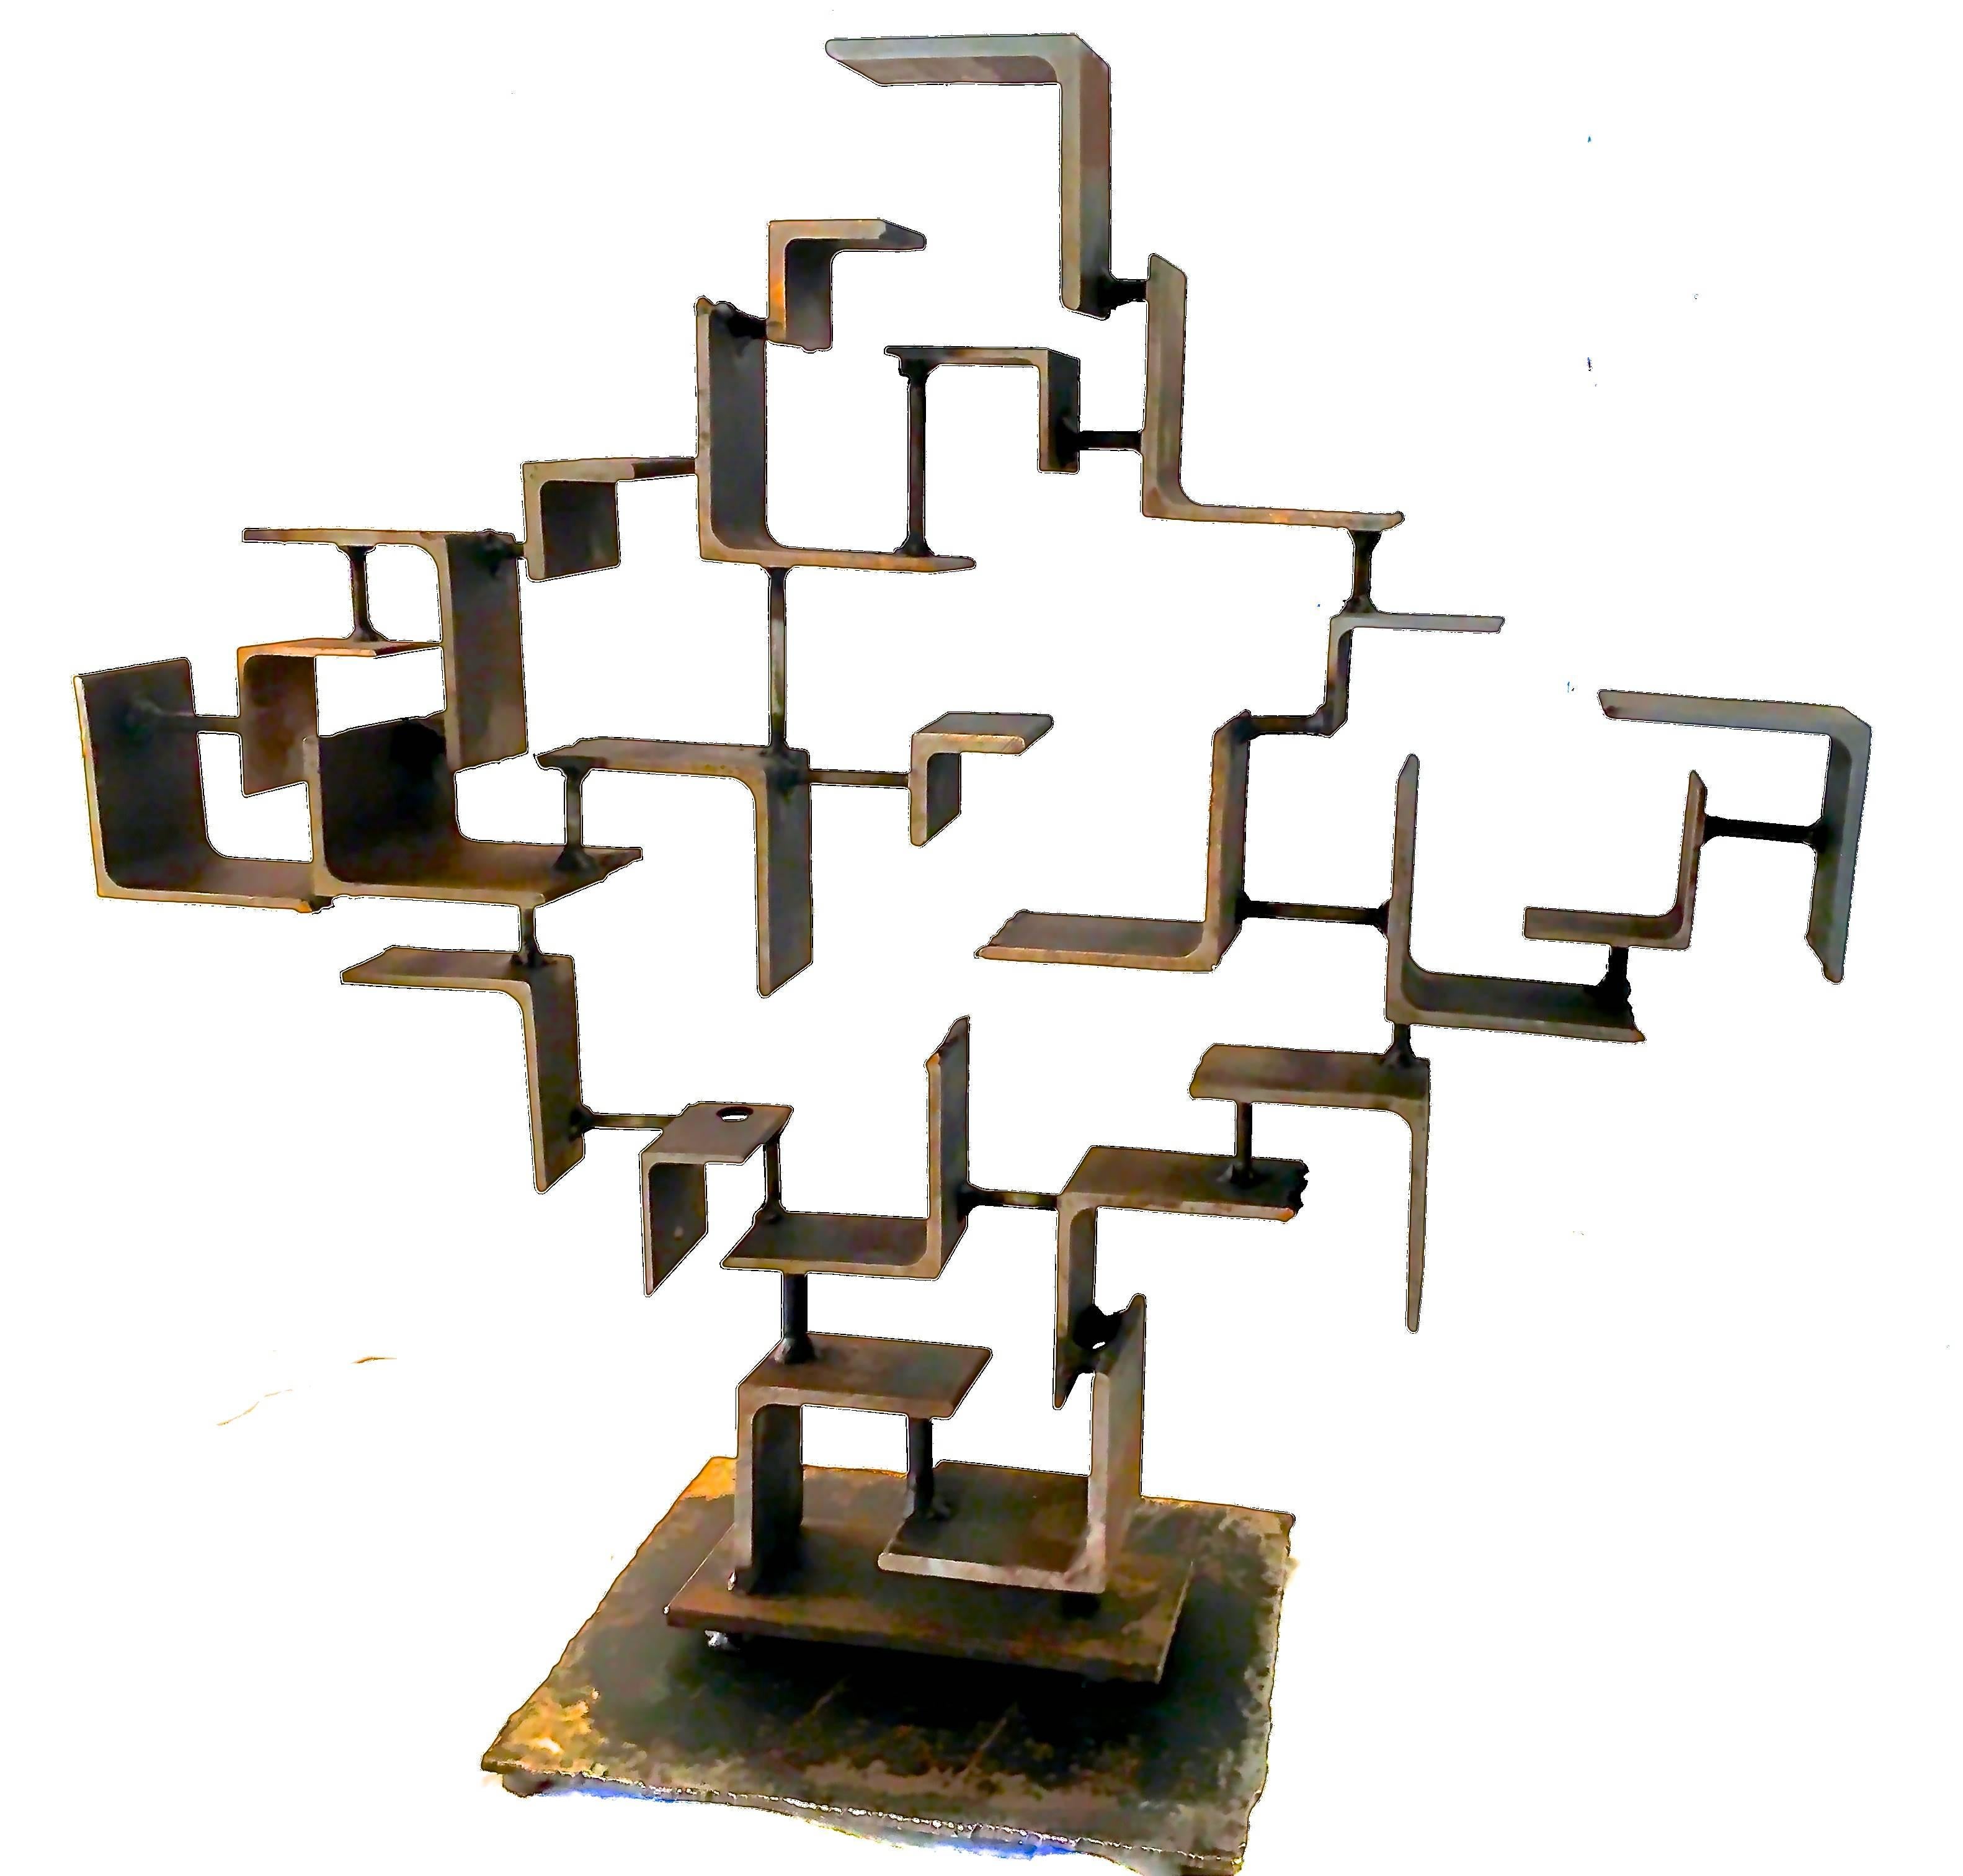 From every angle a new perspective is revealed of this striking Brutalist sculpture in welded raw steel. A transitional piece of art it is perfect for any interior or landscape design project.
  